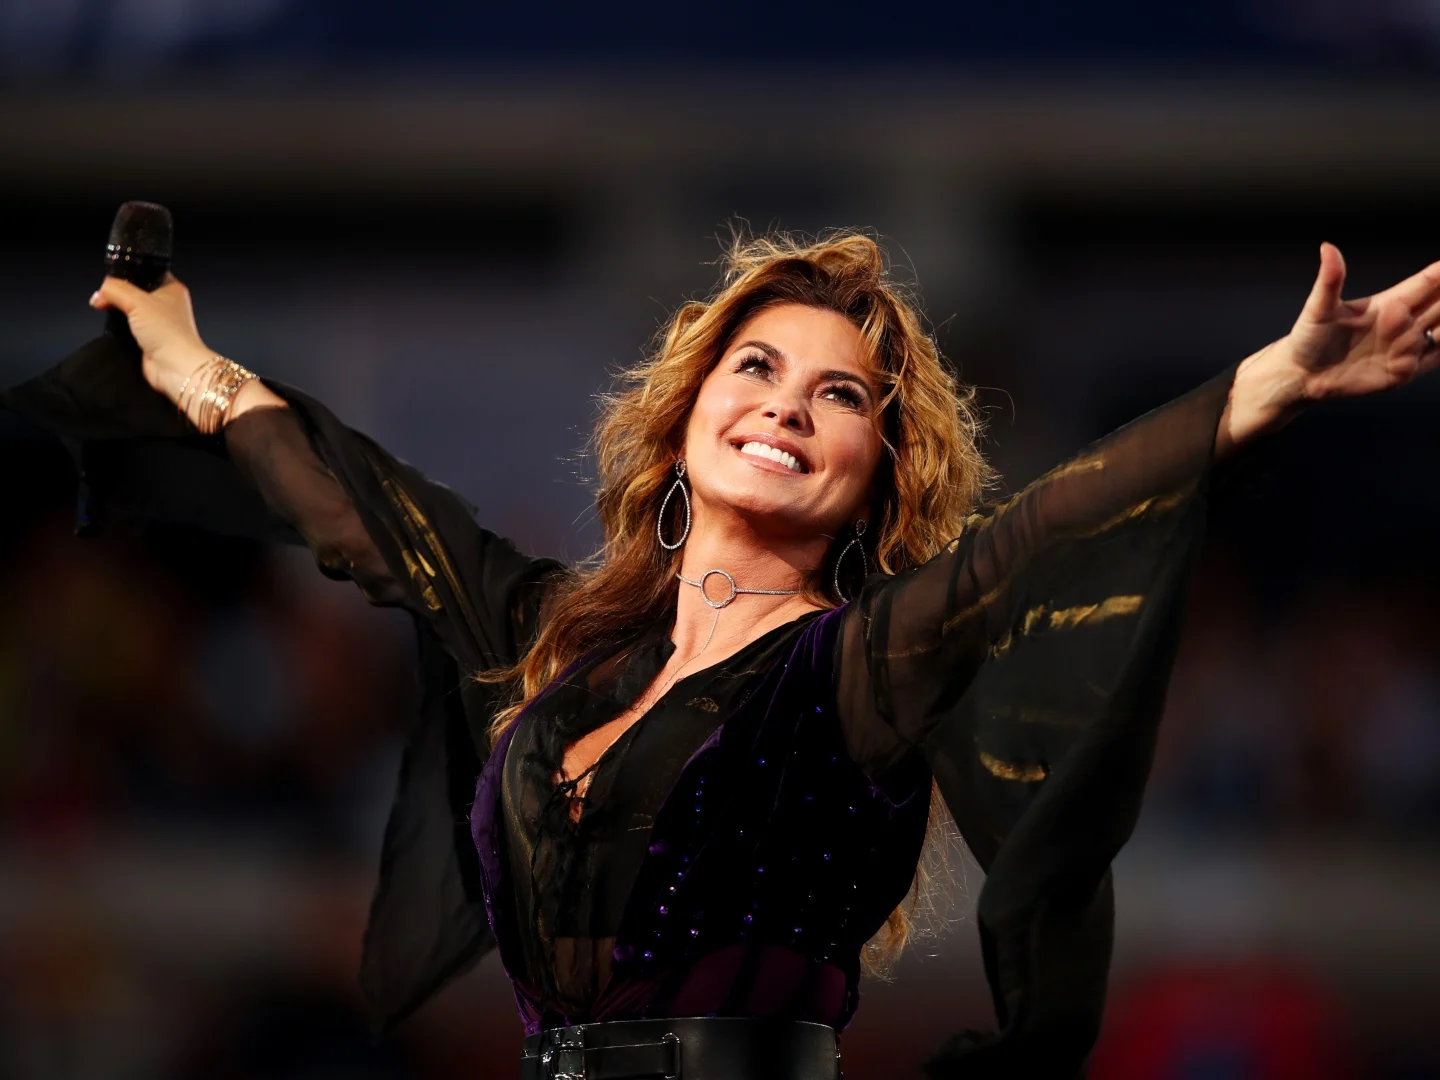 Shania Twain Looks Unrecognizable in This Colorful & Daring New Hair Transformation